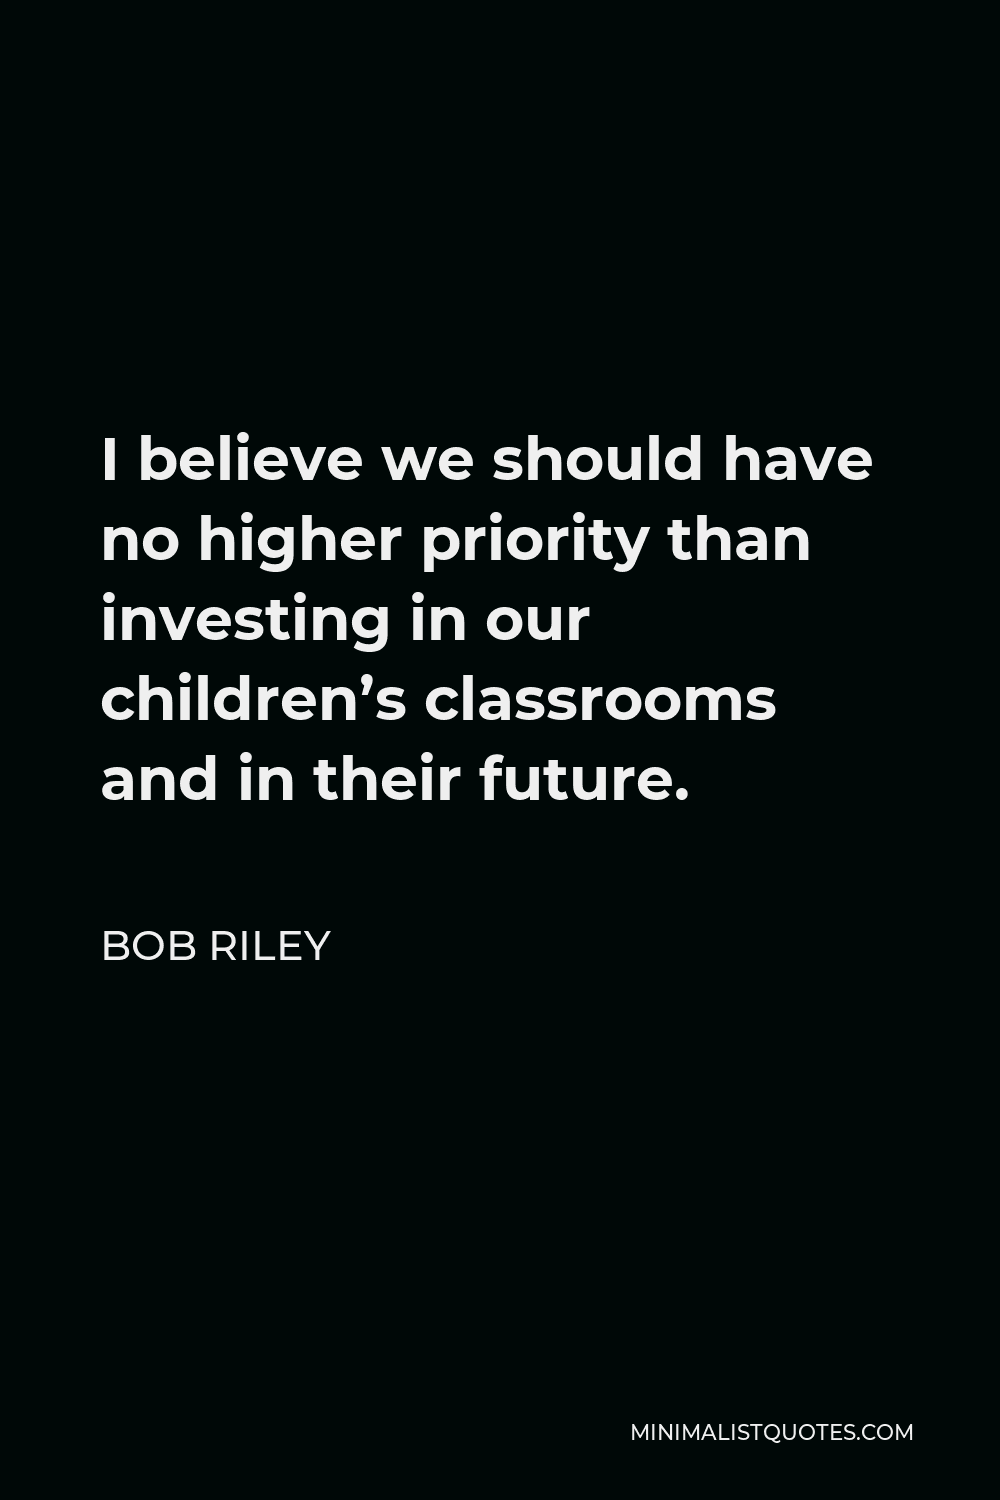 Bob Riley Quote - I believe we should have no higher priority than investing in our children’s classrooms and in their future.